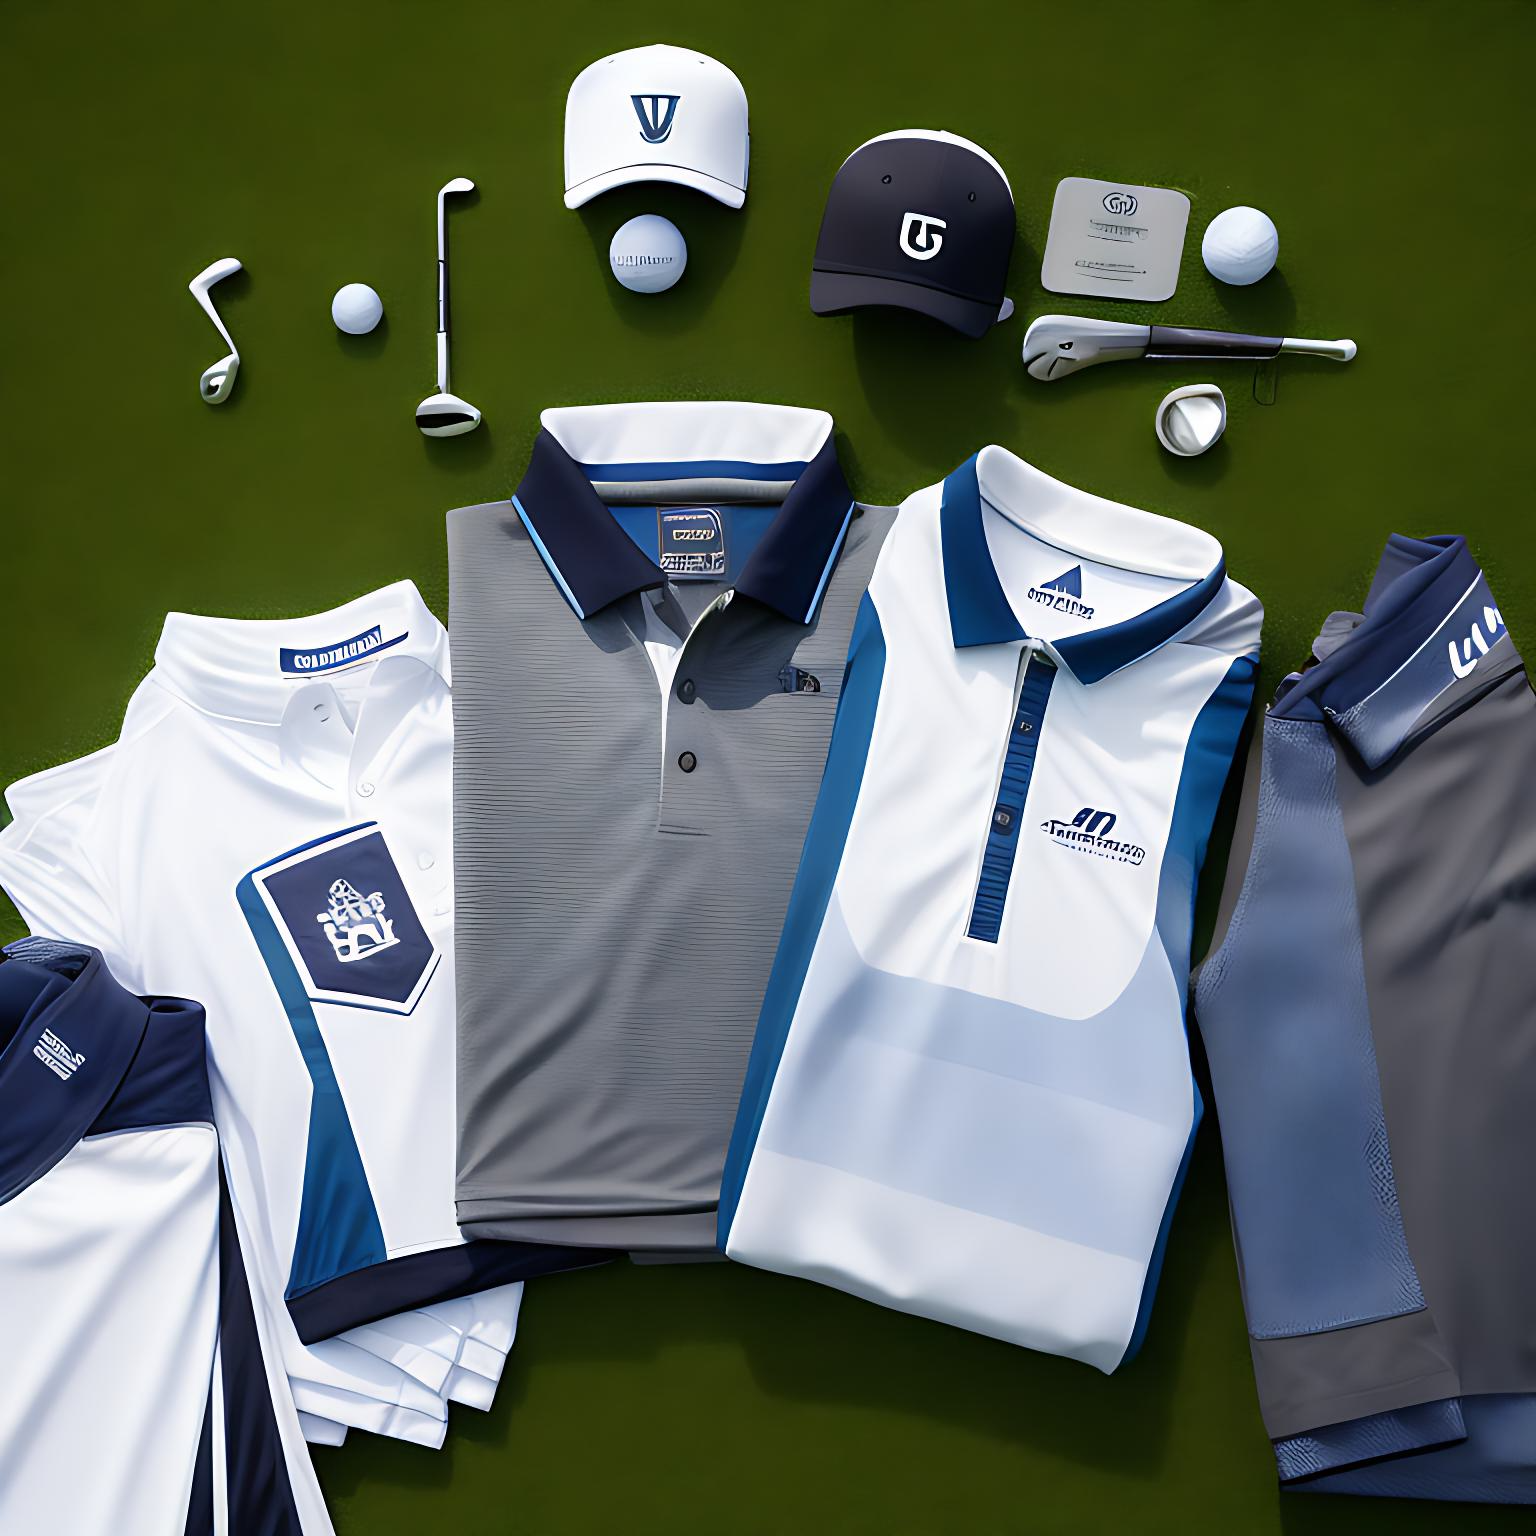 Golf Apparel and promo items